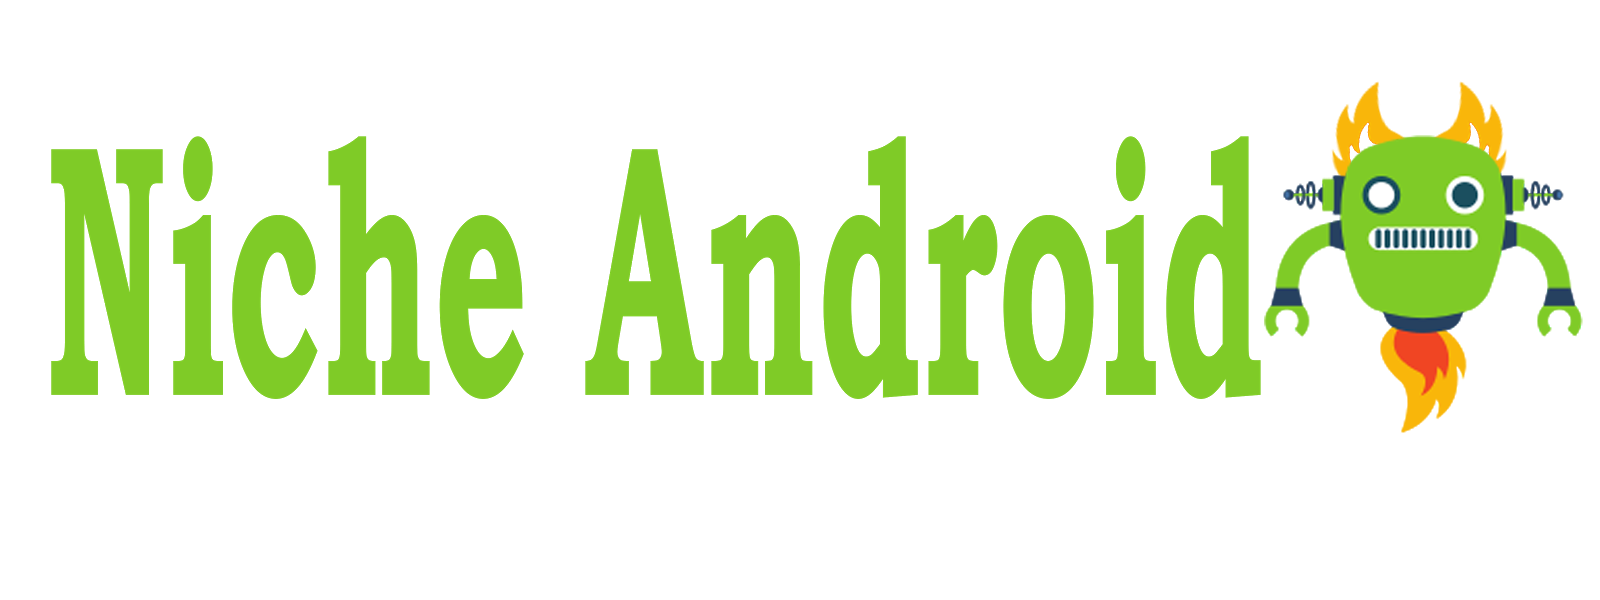 Niche Android